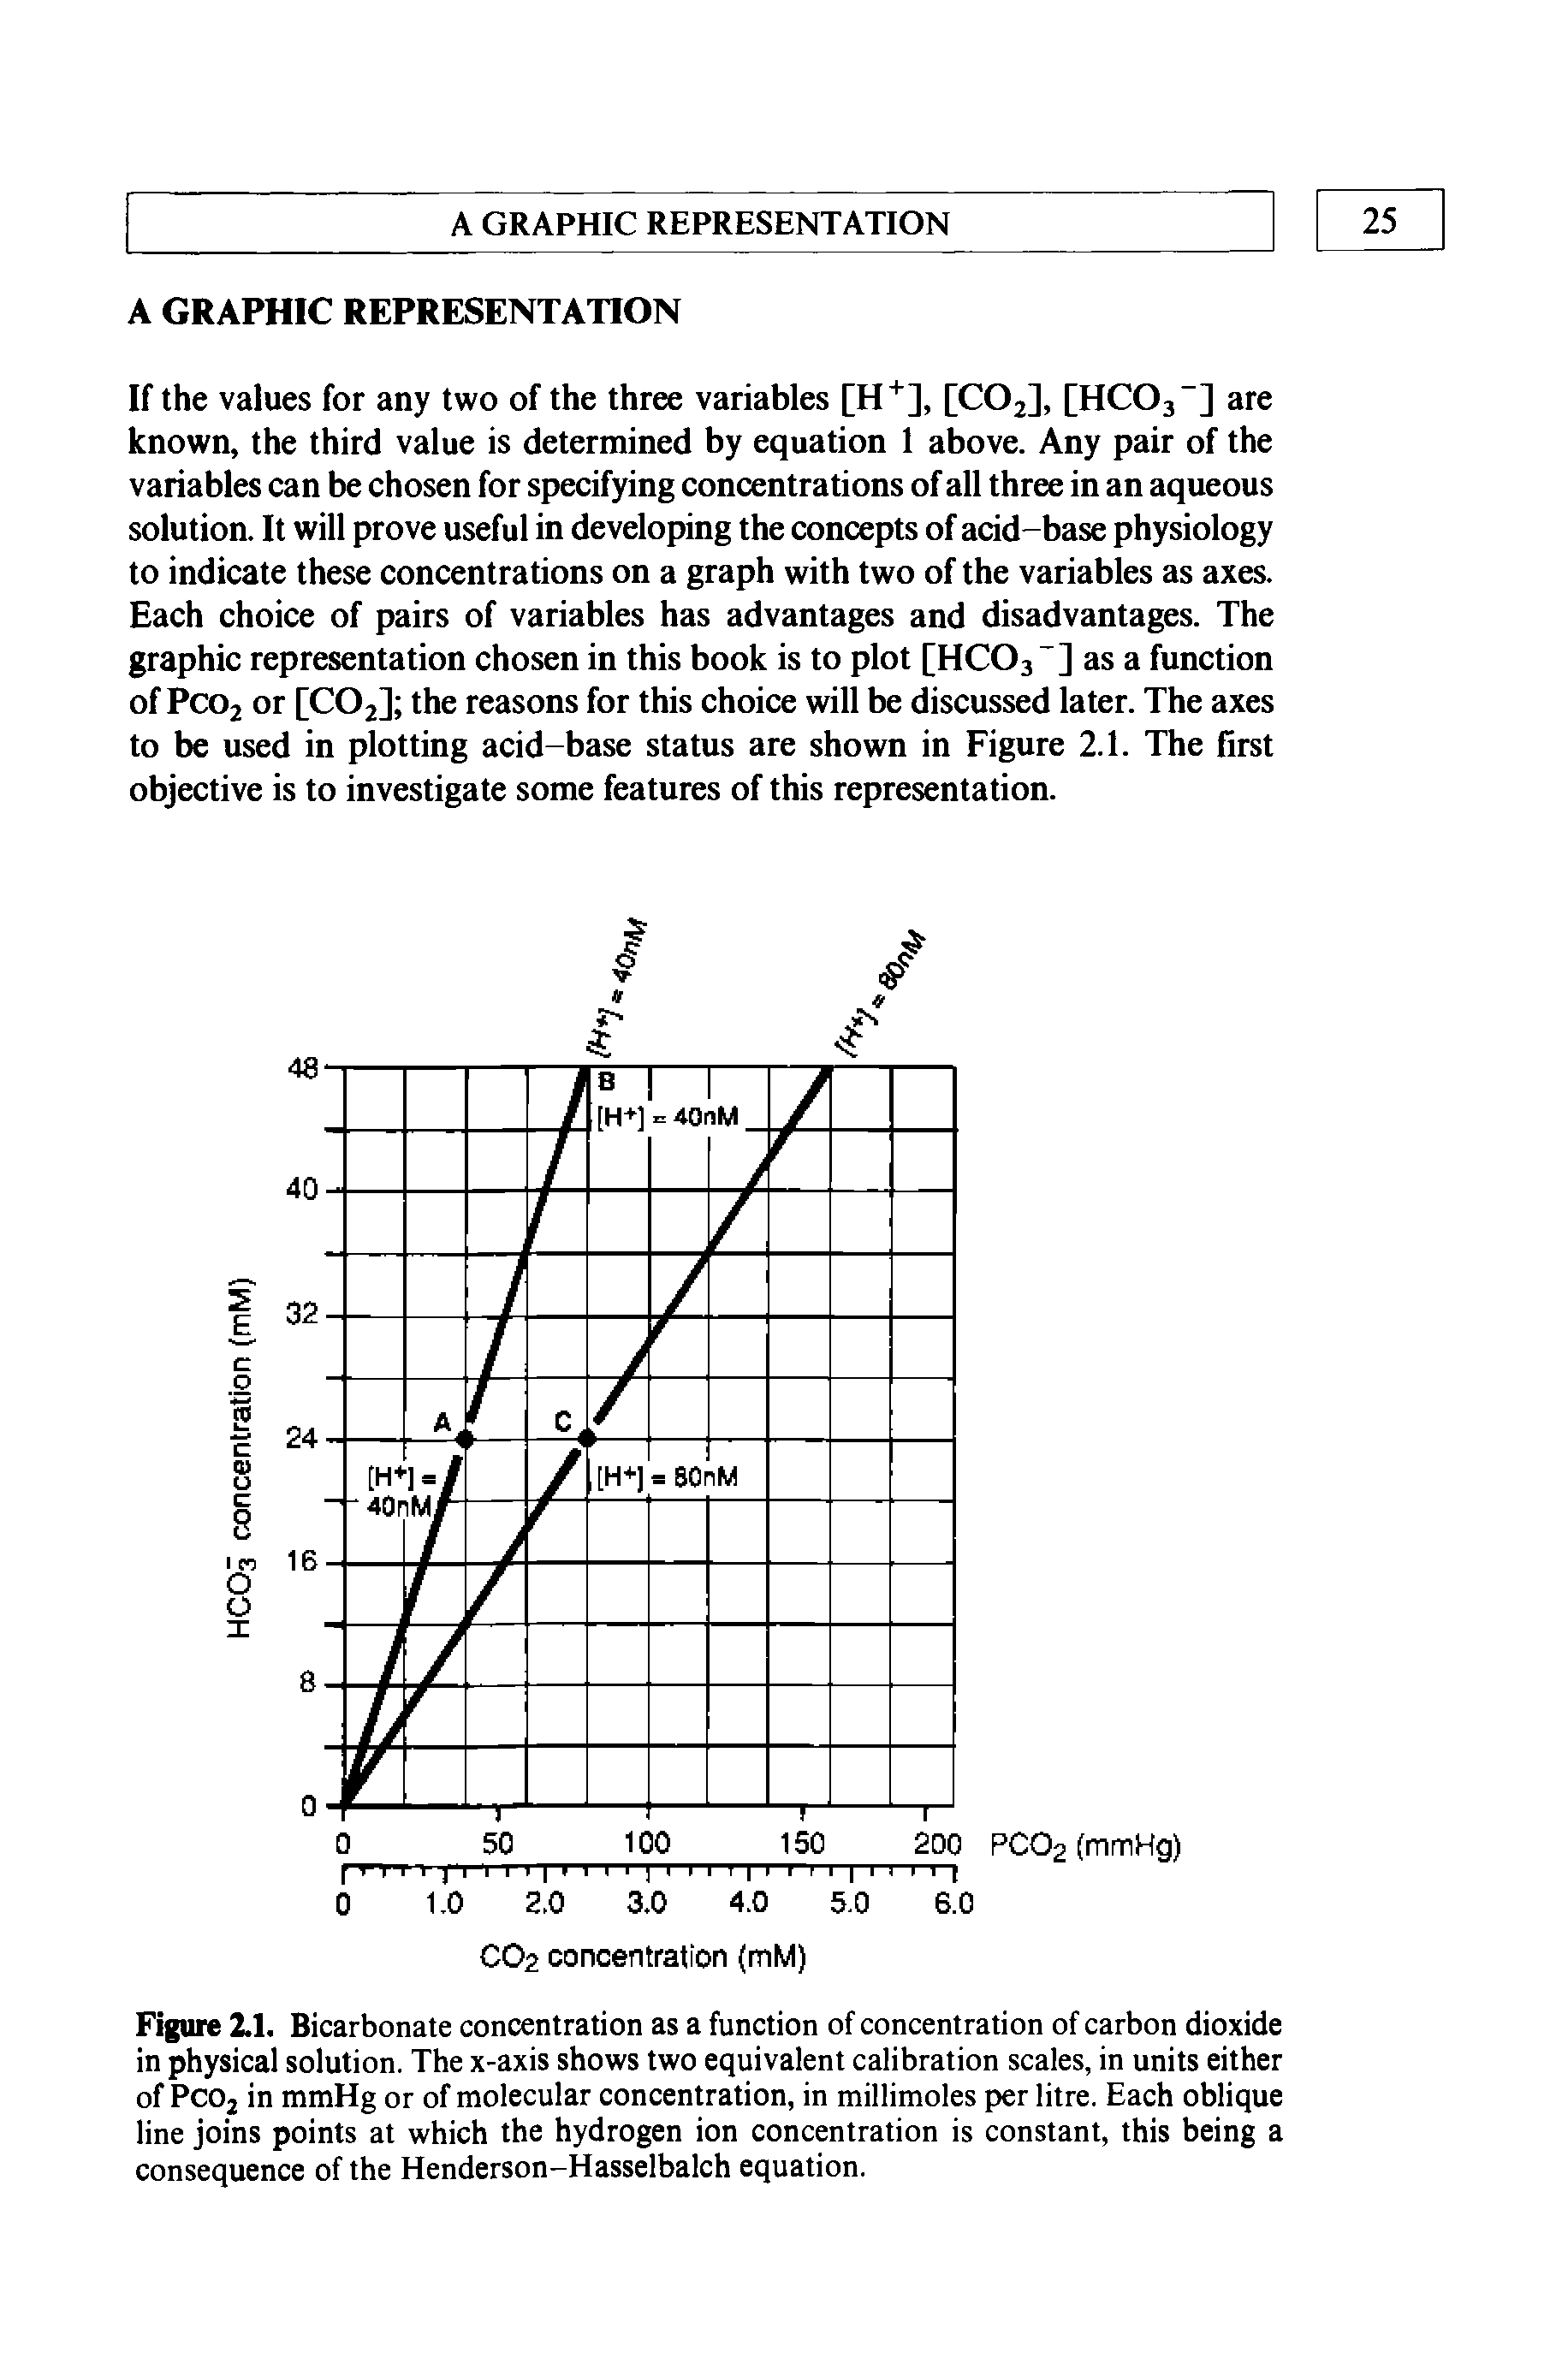 Figure 2.1. Bicarbonate concentration as a function of concentration of carbon dioxide in physical solution. The x-axis shows two equivalent calibration scales, in units either of PCO2 in mmHg or of molecular concentration, in millimoles per litre. Each oblique line joins points at which the hydrogen ion concentration is constant, this being a consequence of the Henderson-Hasselbalch equation.